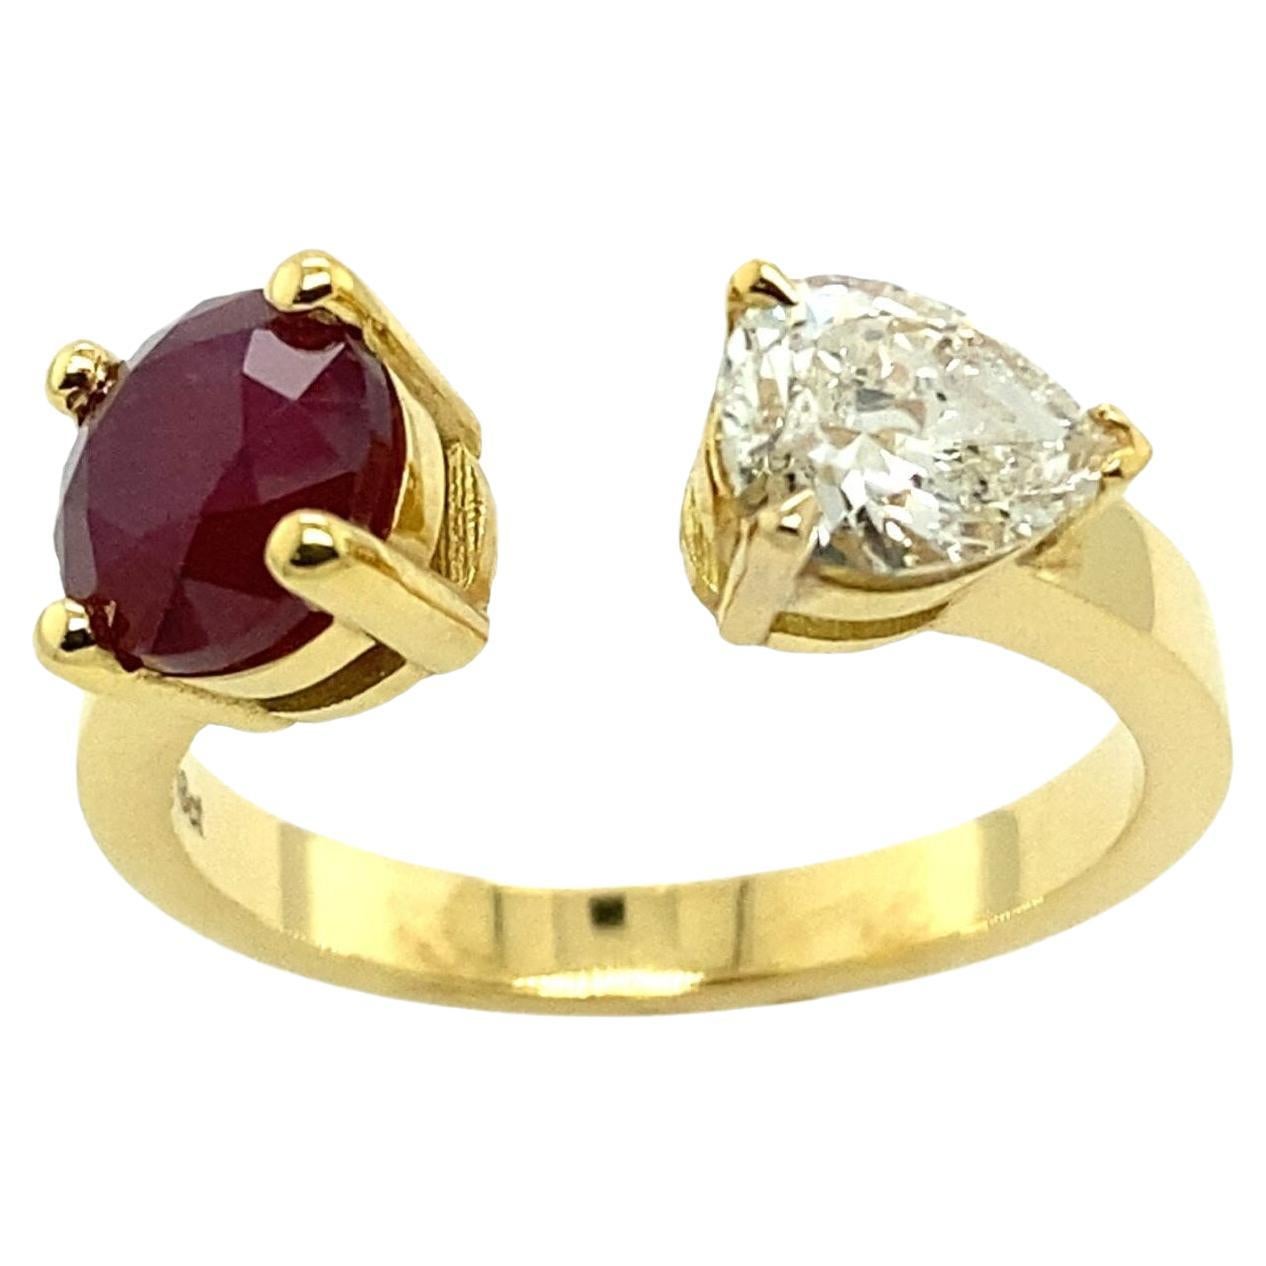 0.69ct G/H/SI Pear Shape Natural Diamond and 1.48ct Round Ruby in 18ct Gold